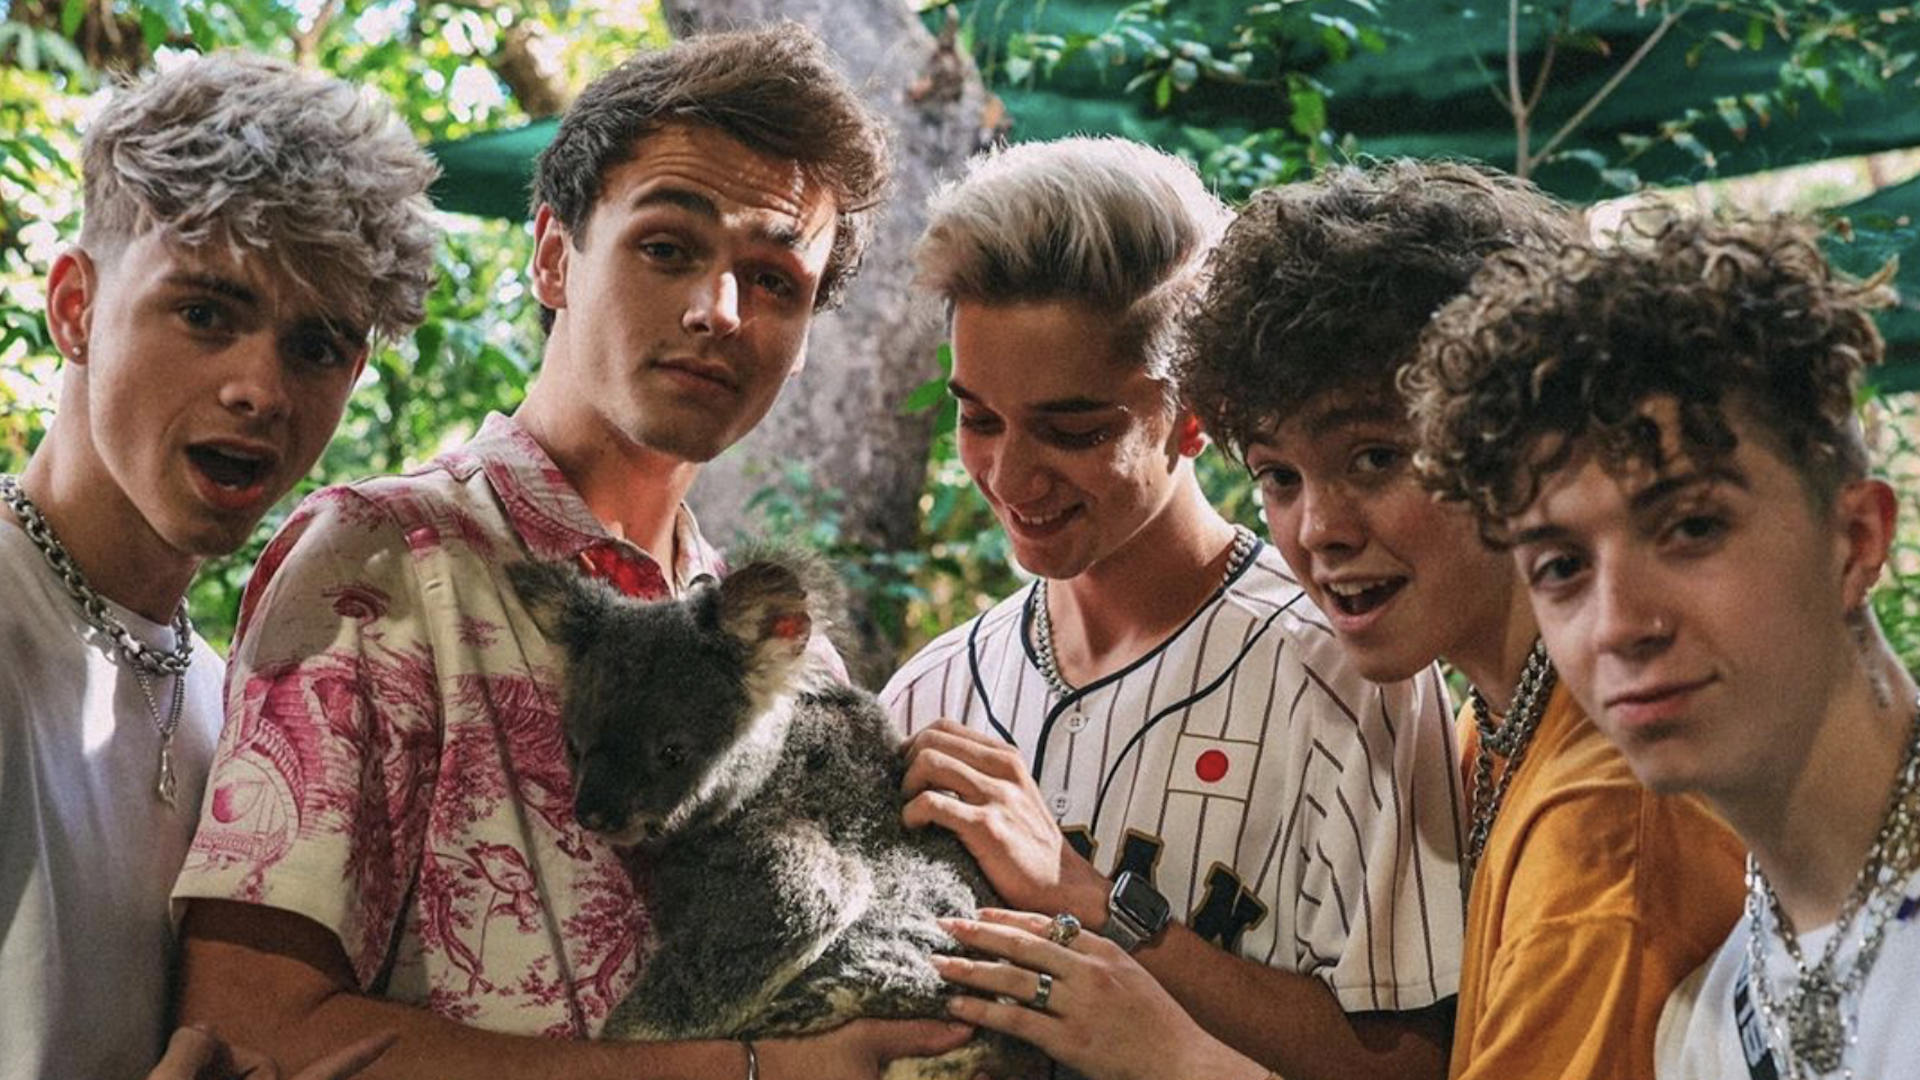 Why Don't We pose with a koala